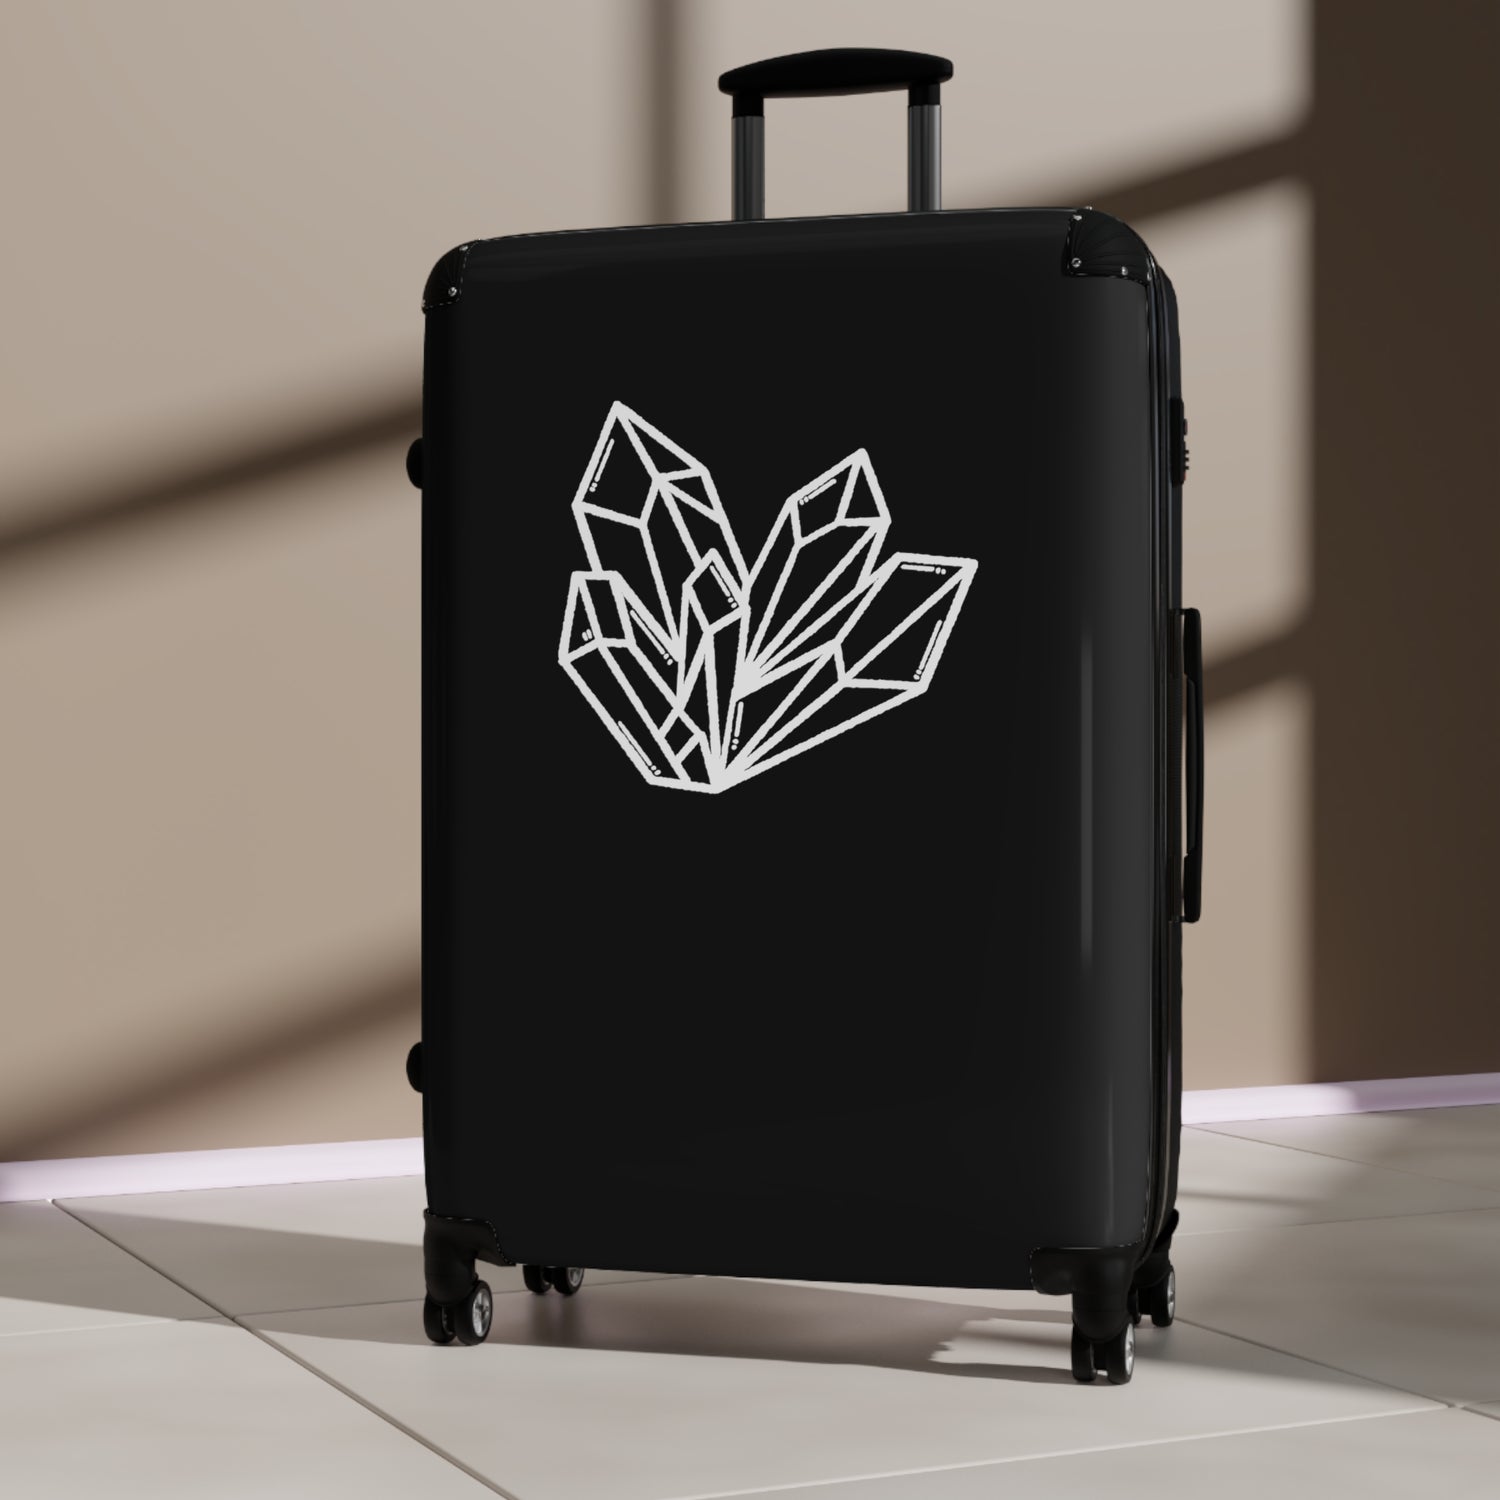 Suitcase with Crystals Design